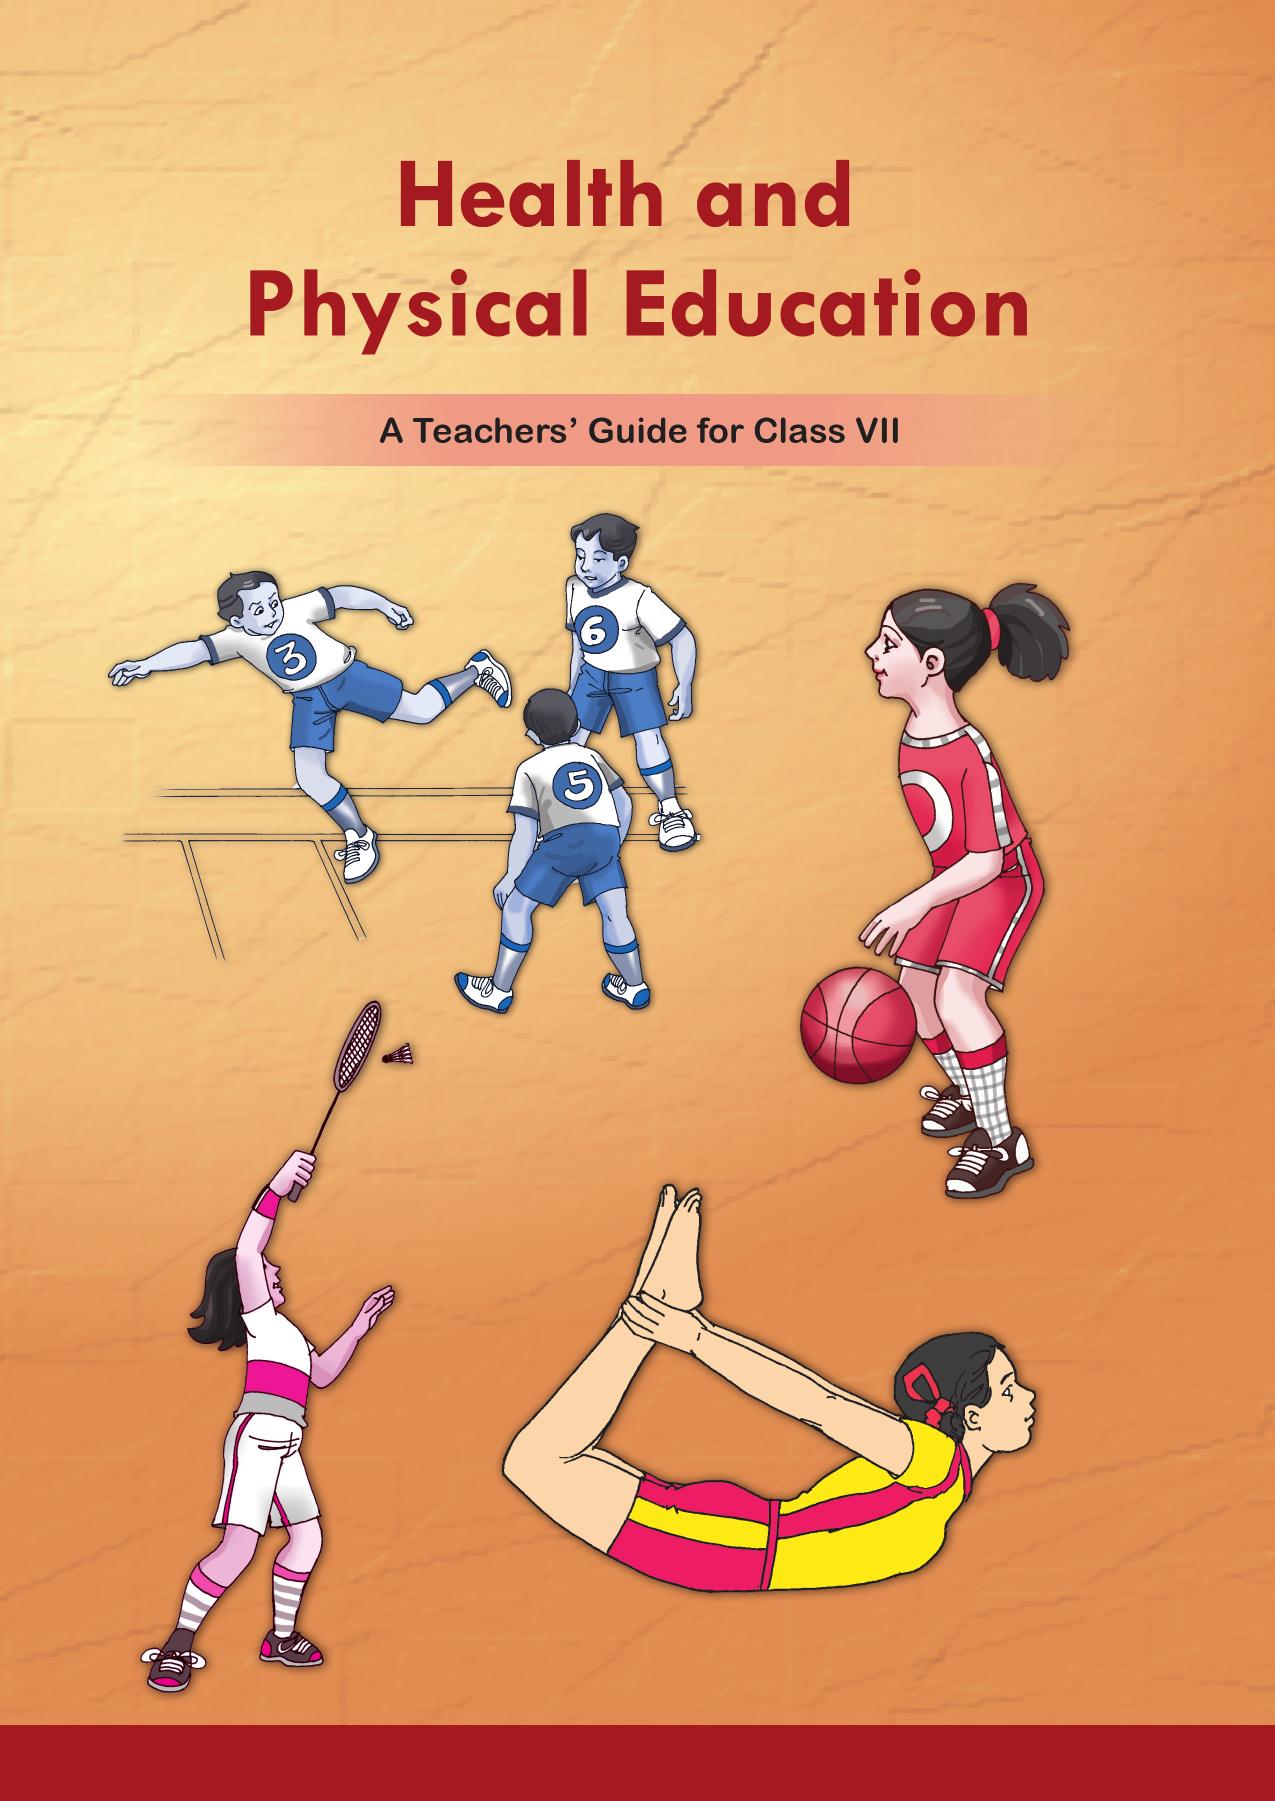 Health and Physical Education A Teachers' Guide for Class VII 2017